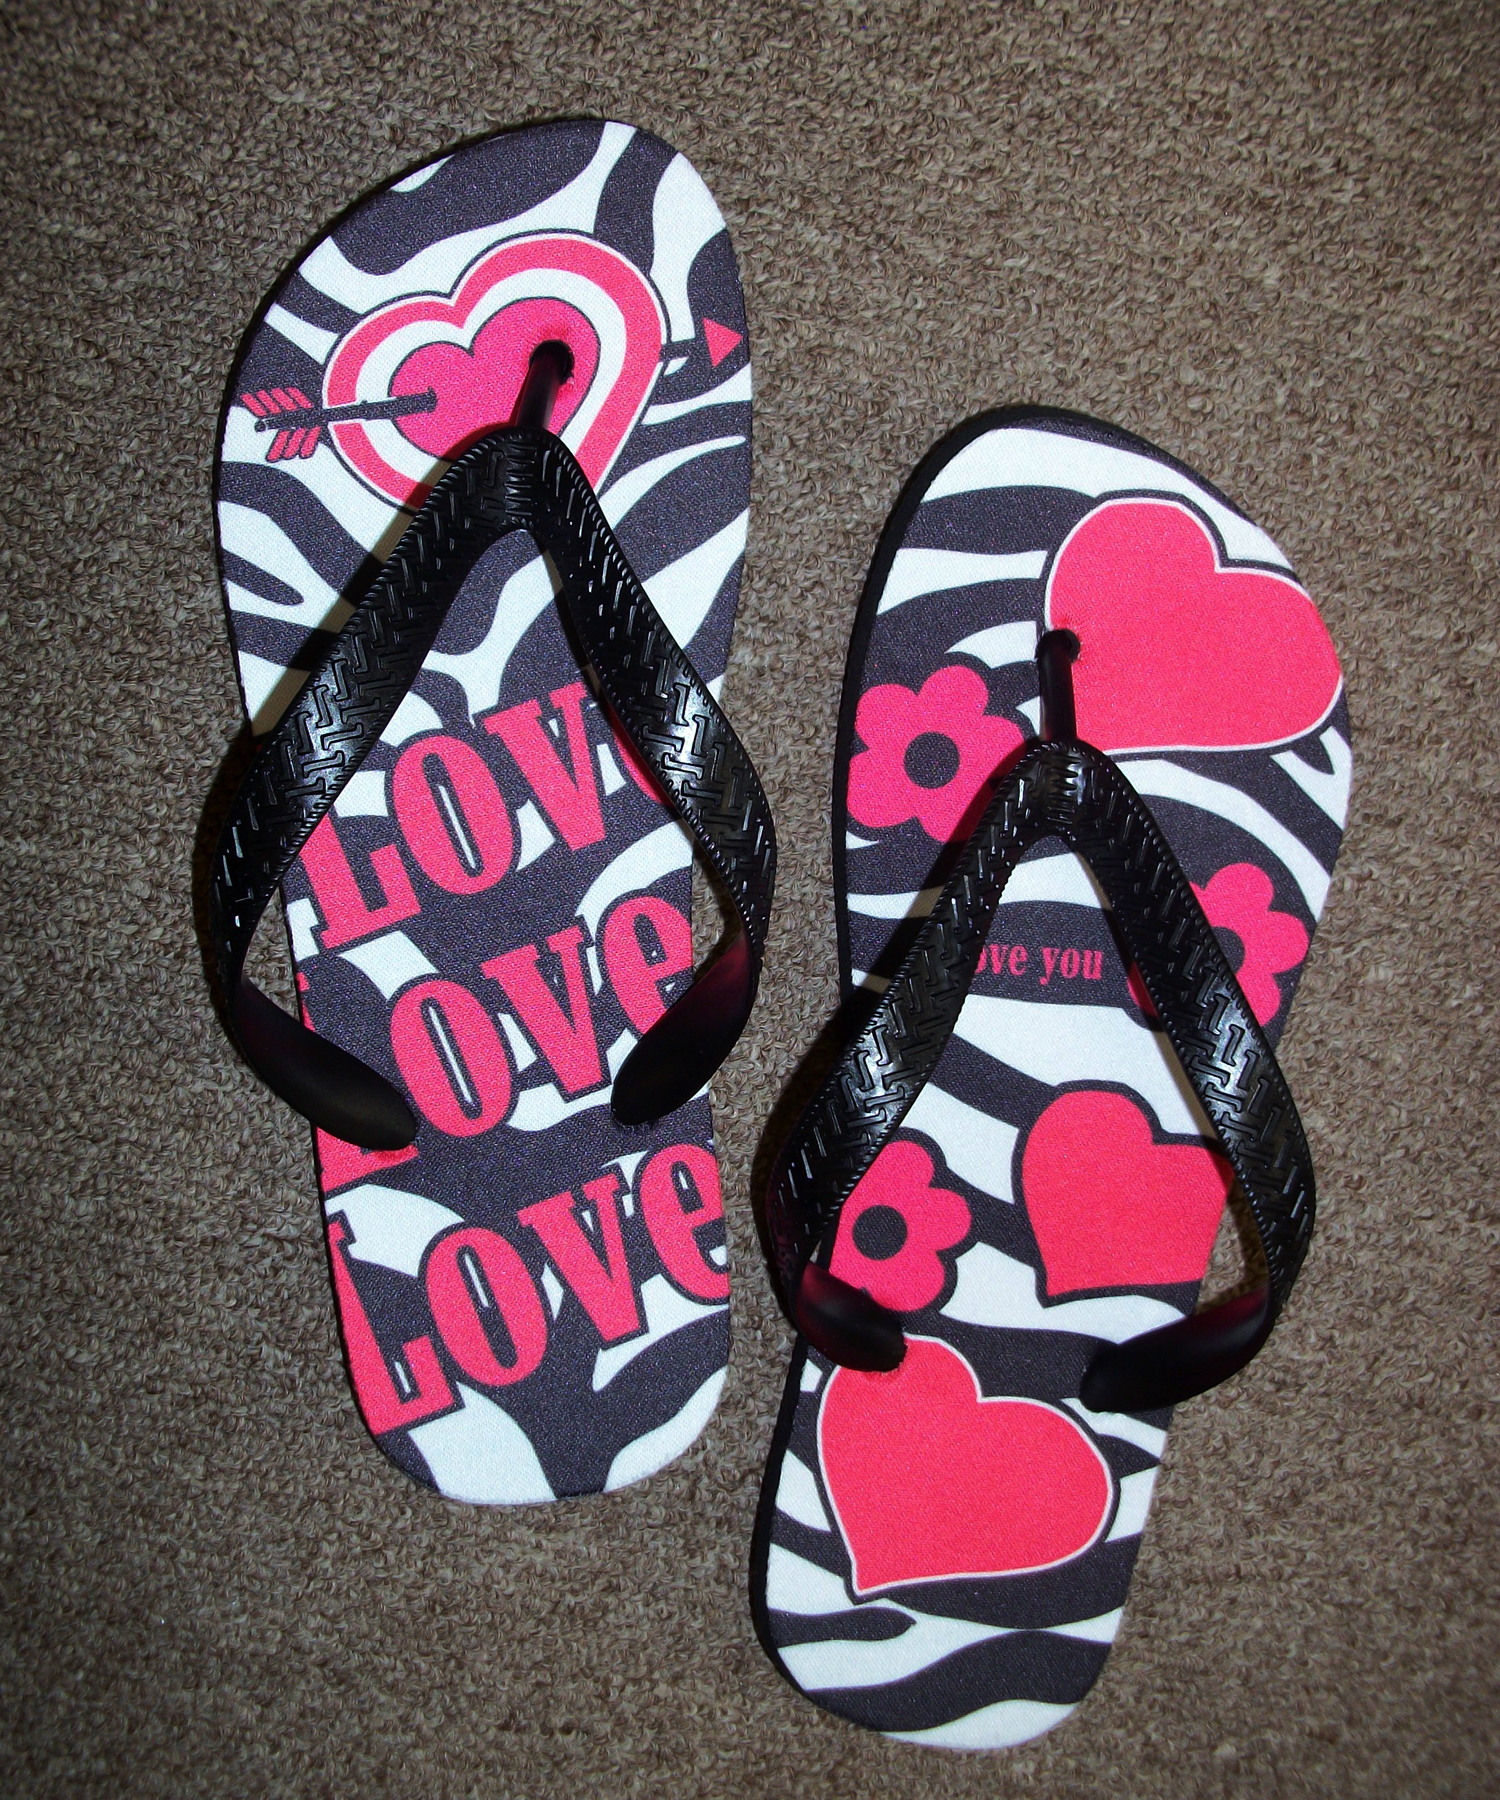 Flops made with sublimation printing